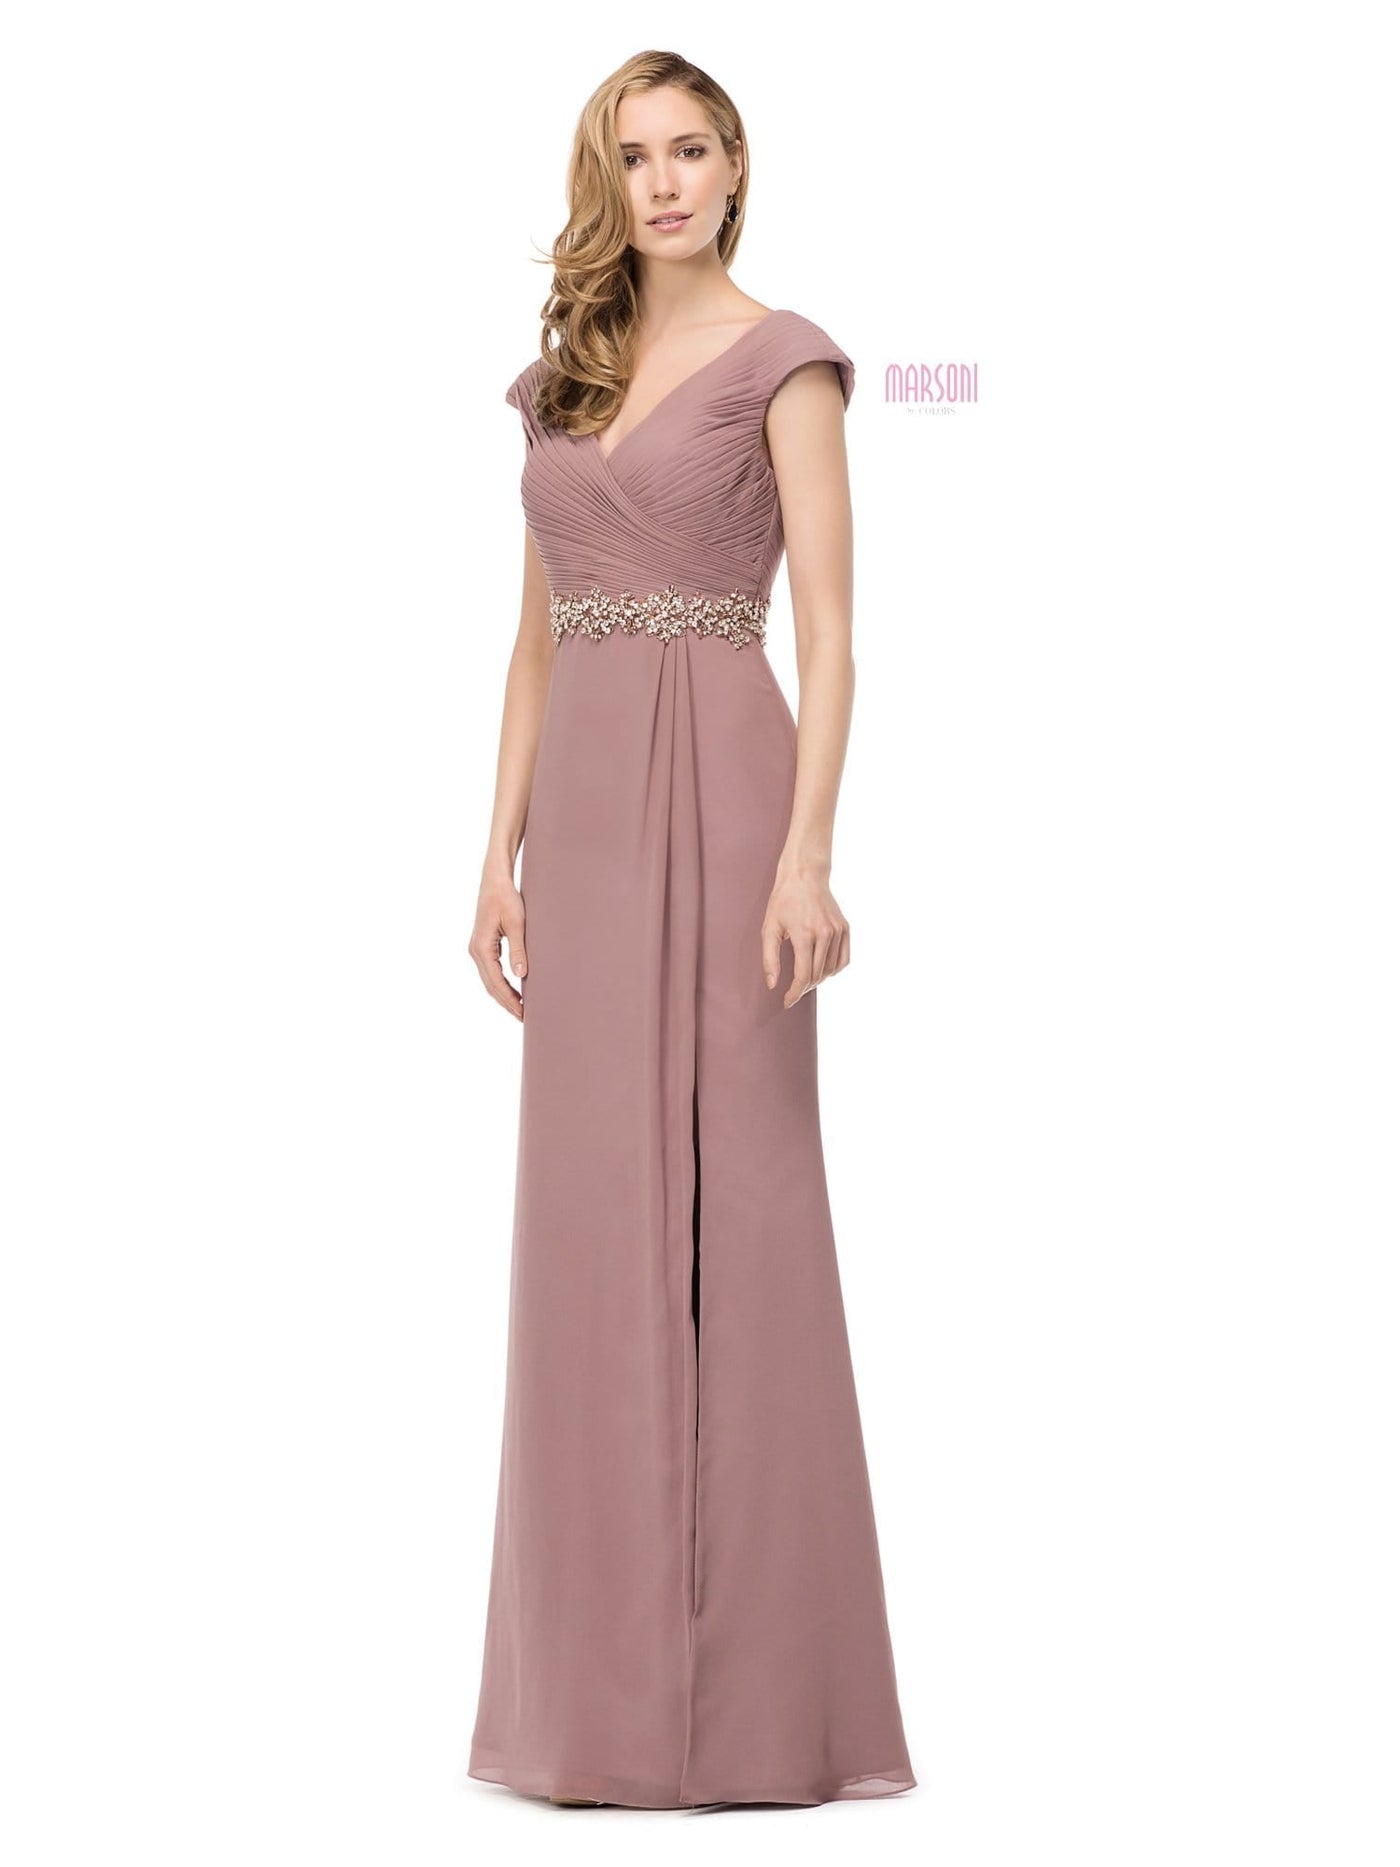 Marsoni by Colors - Ruched Wrap Cap Sleeve Gown M169 - 1 pc Taupe In Size 12 Available CCSALE 12 / Taupe